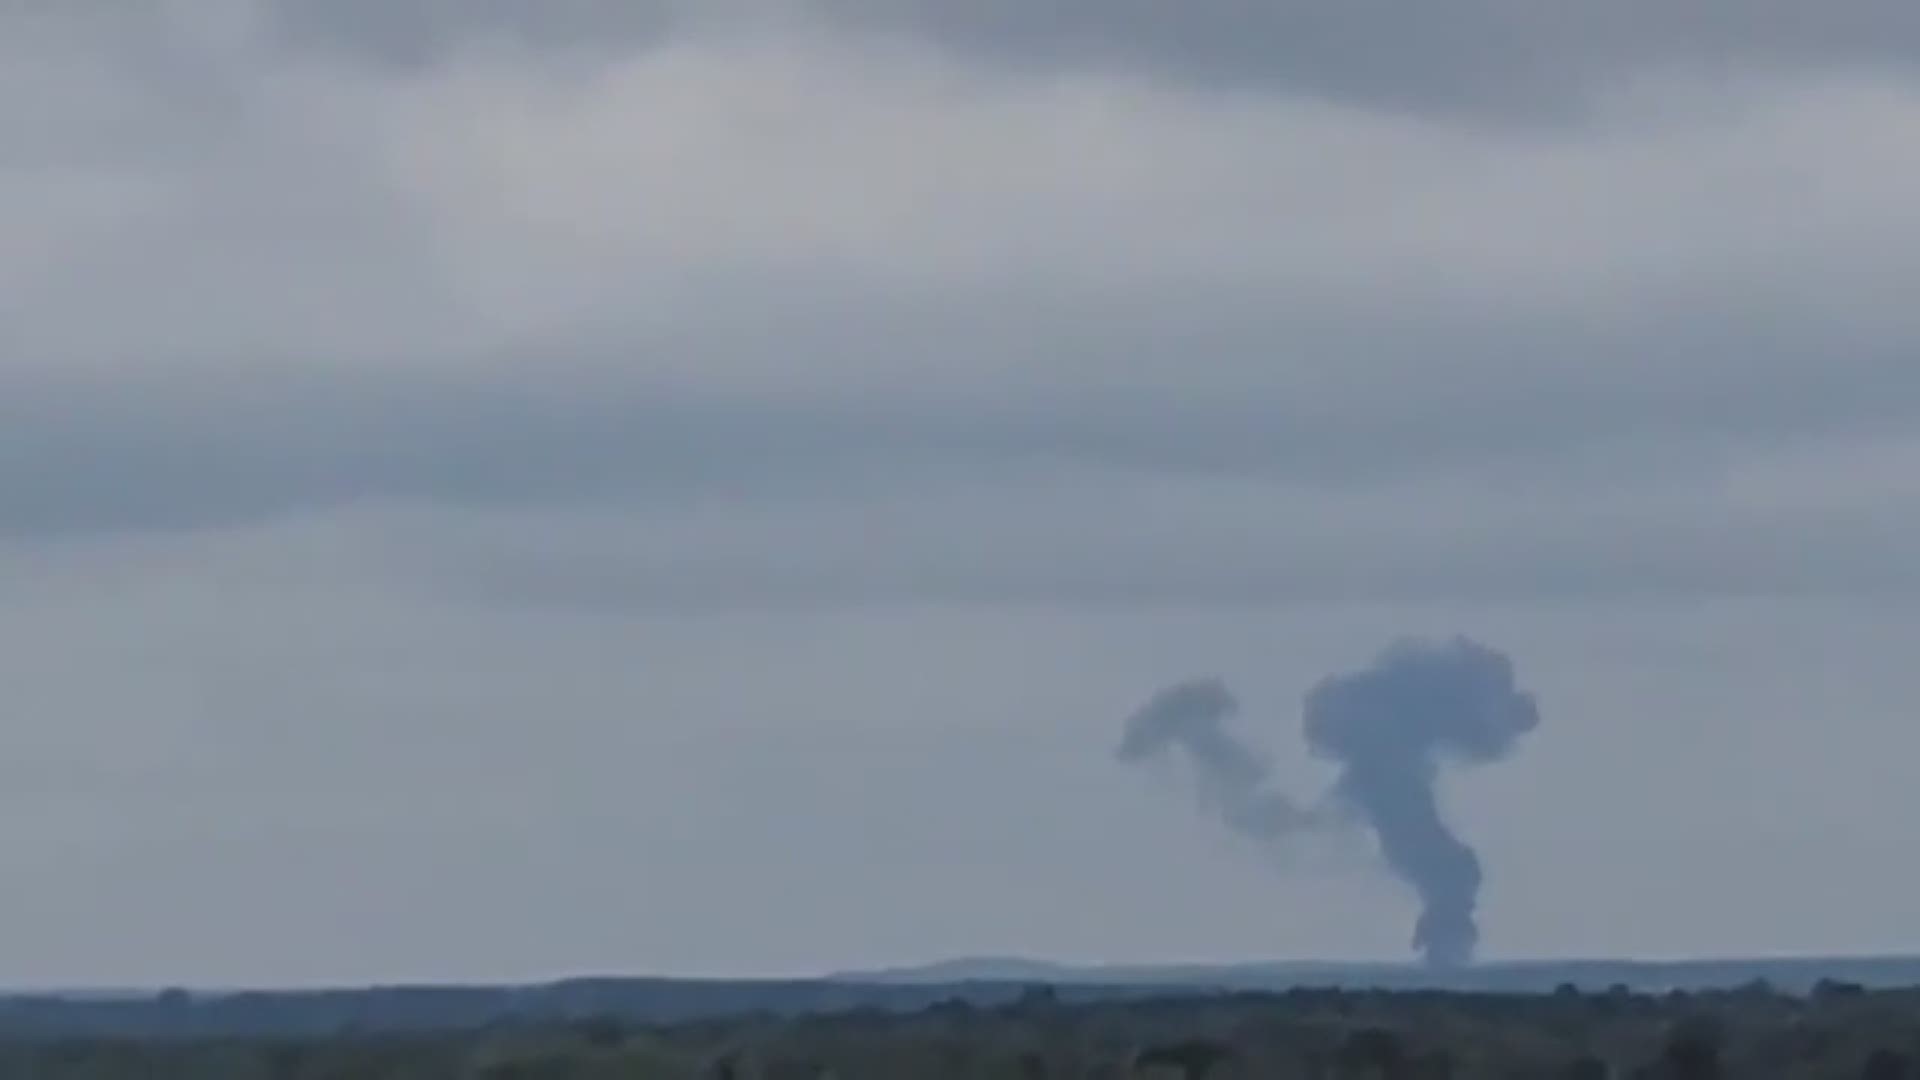 A Twitter user shared the video, which shows plumes of smoking filing the air. Officials said the pilot ejected from the aircraft and was not hurt.